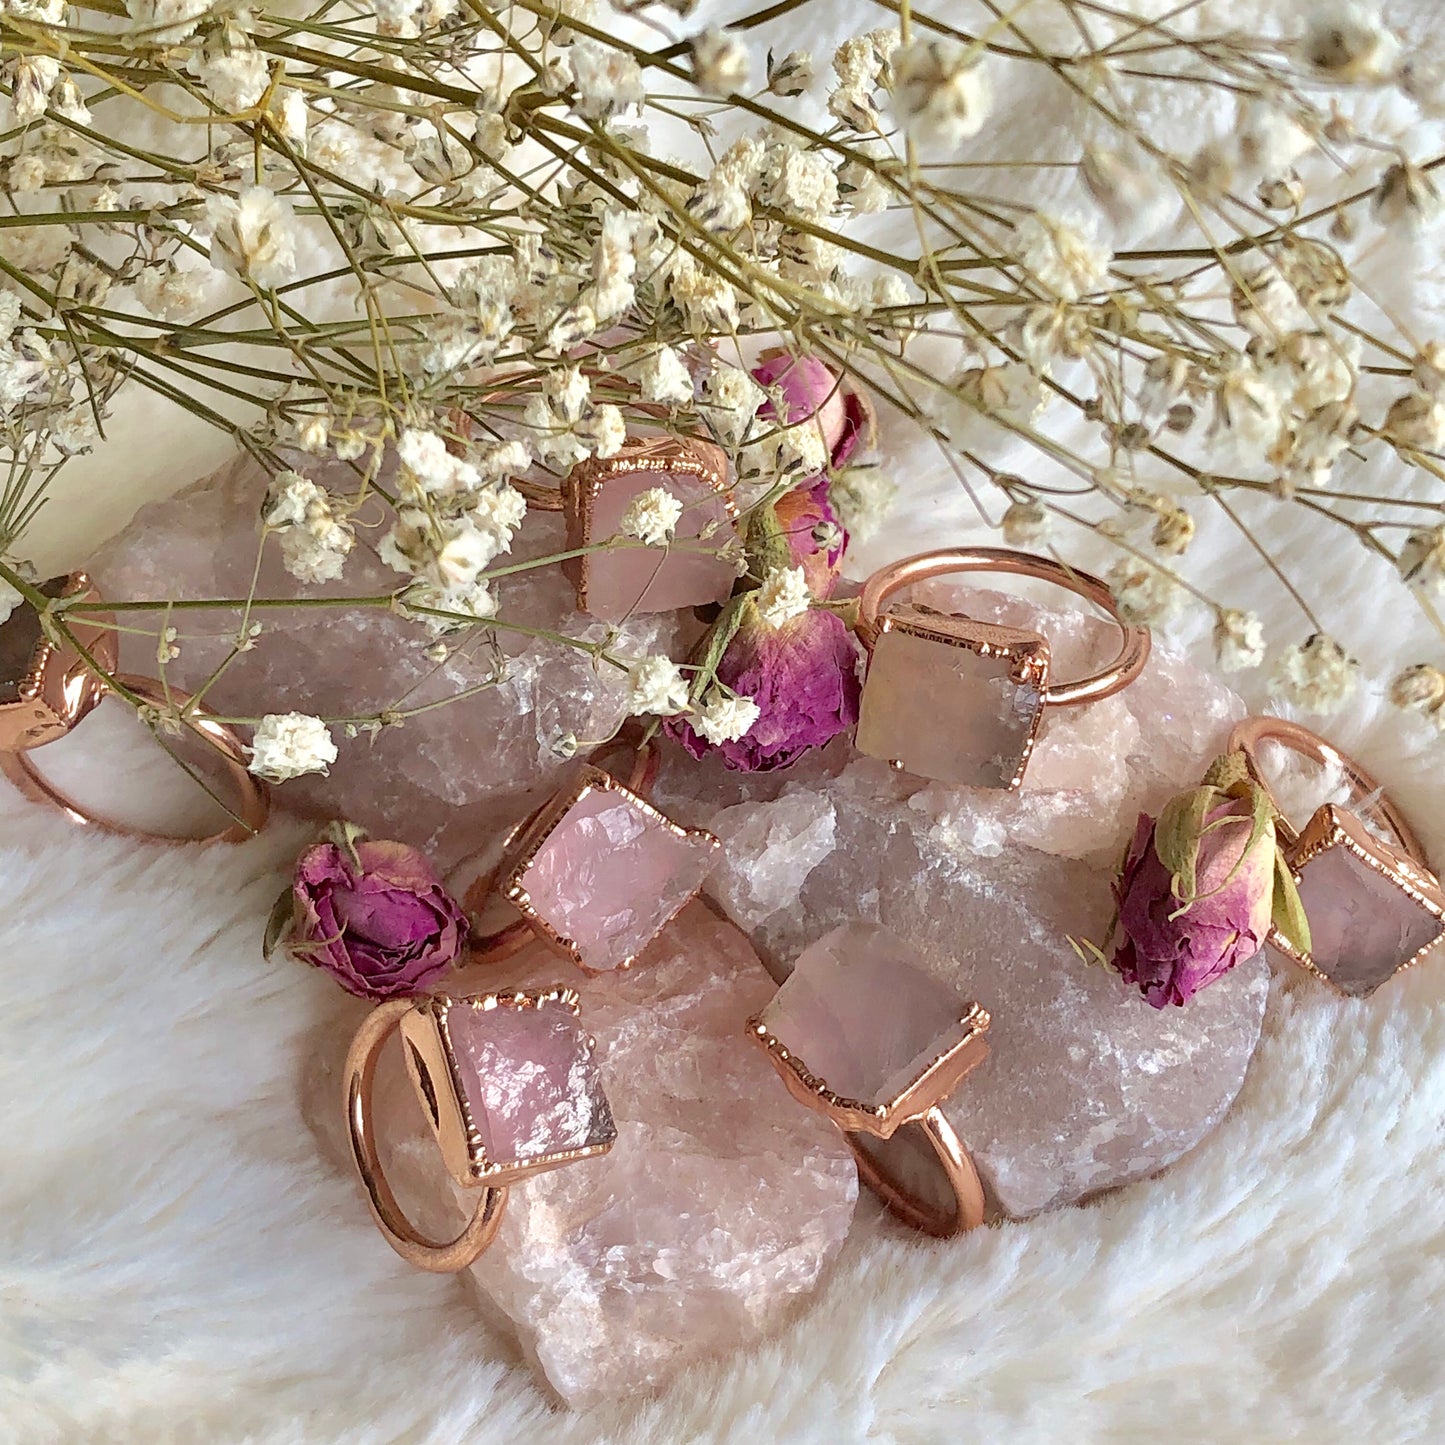 Rose Quartz Electroformed Crystal Jewellery Ring In Healing Copper